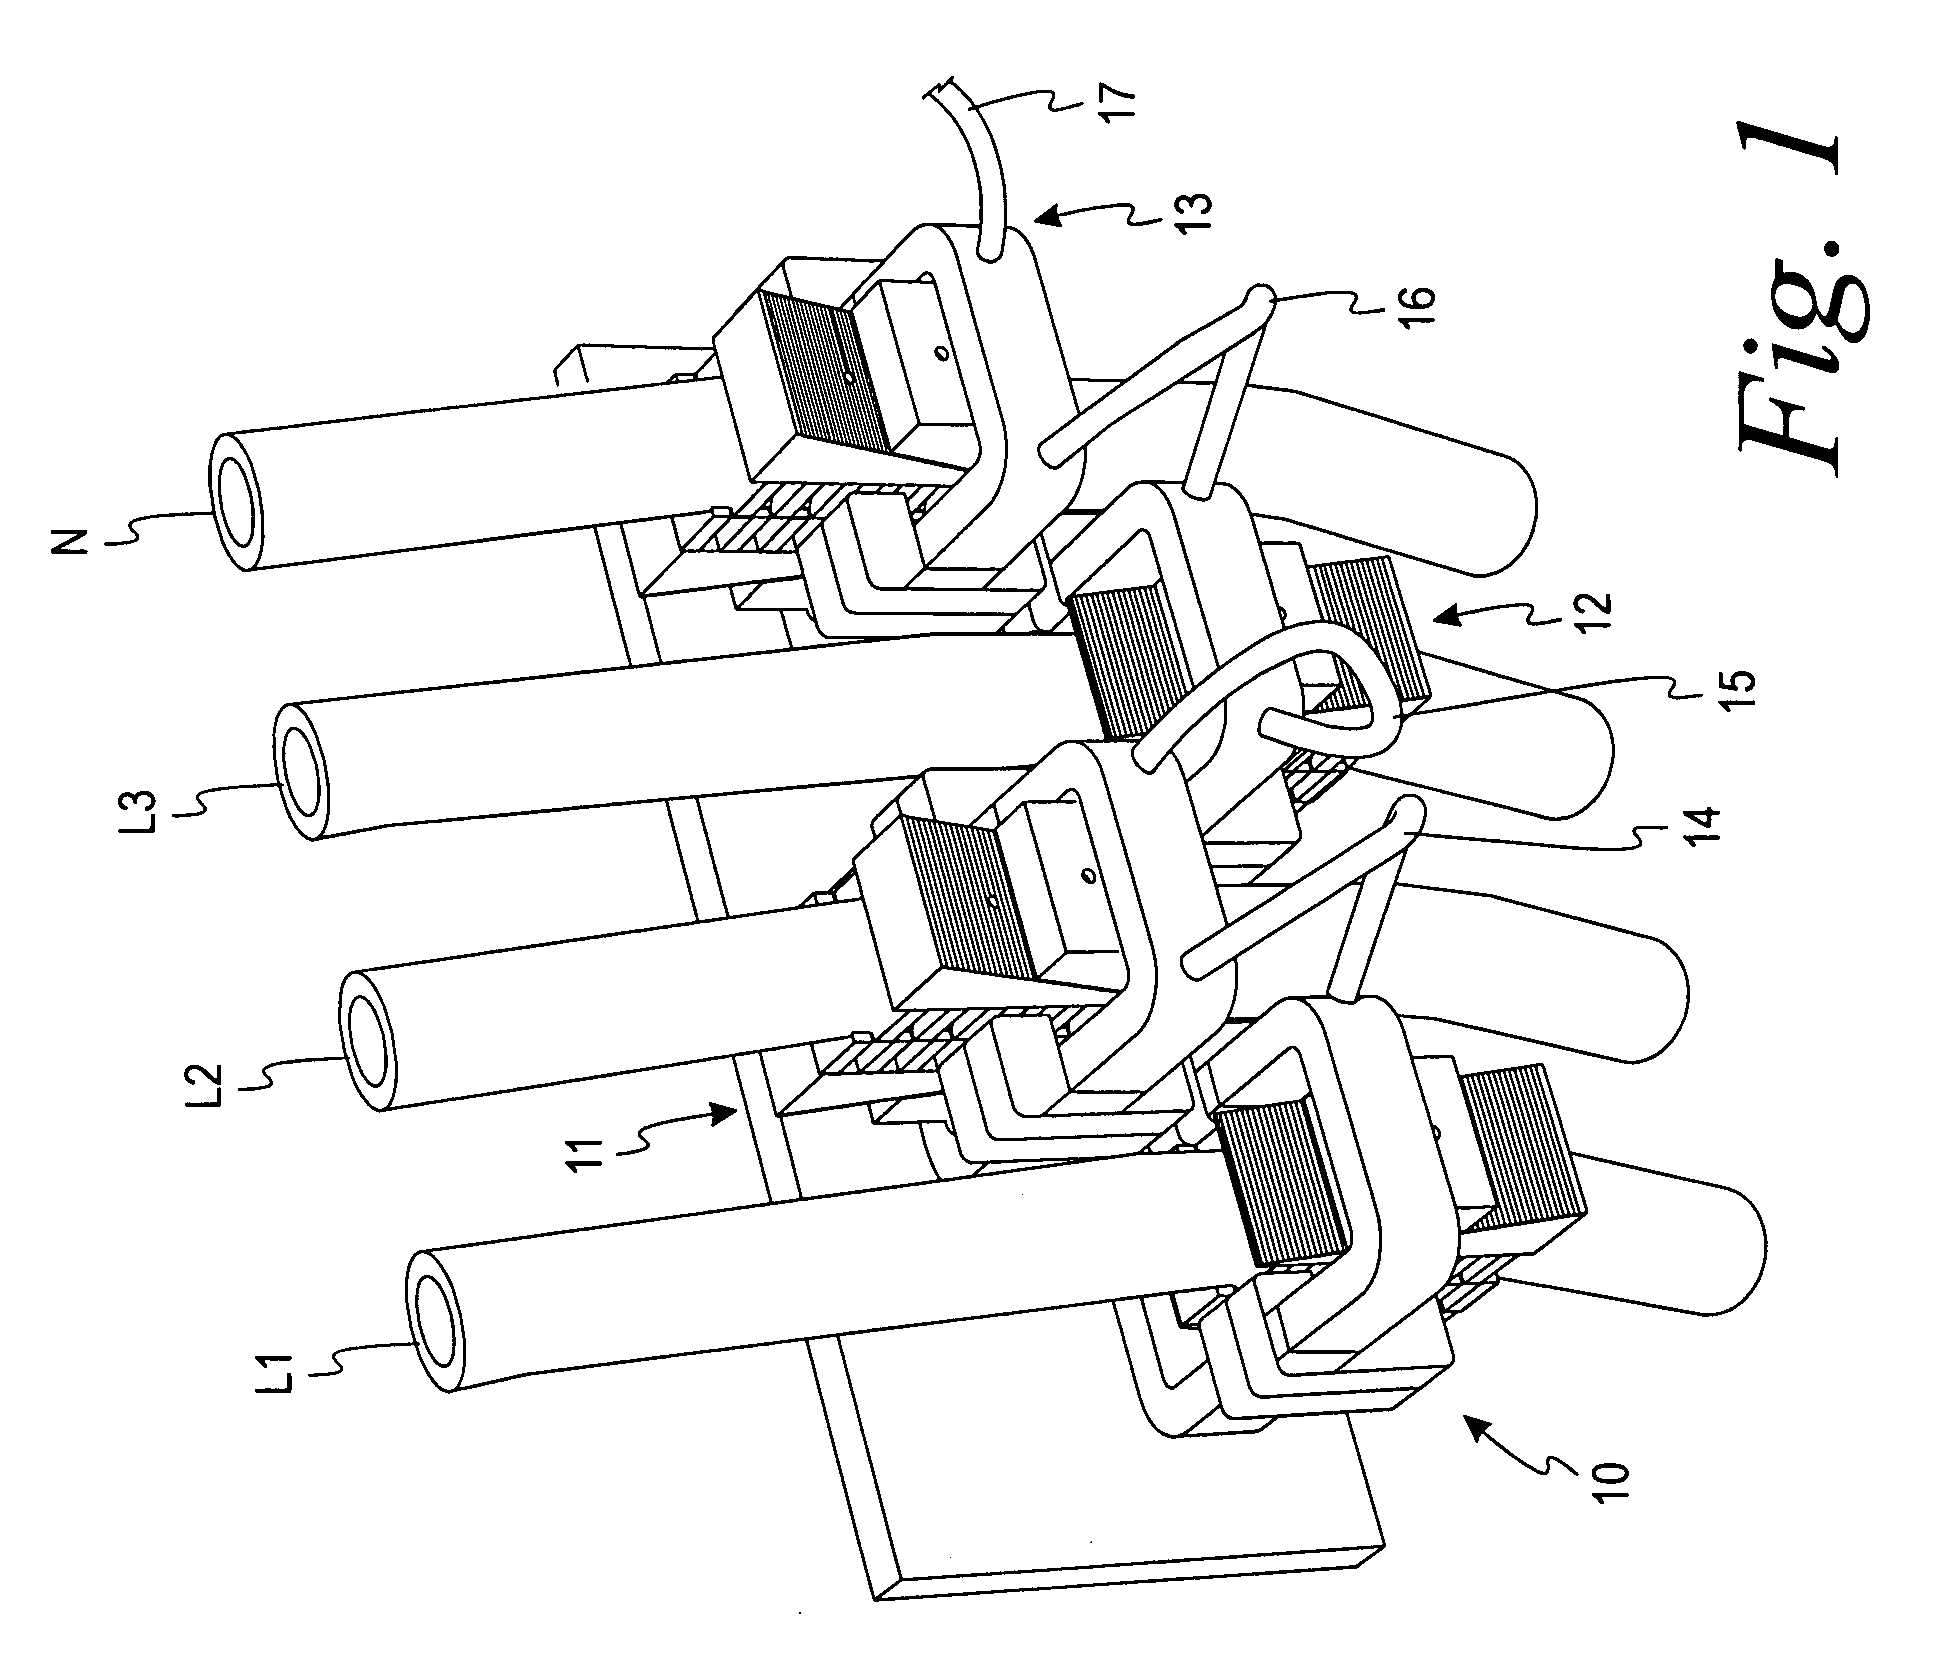 Clamp-on current and voltage module for a power monitoring system